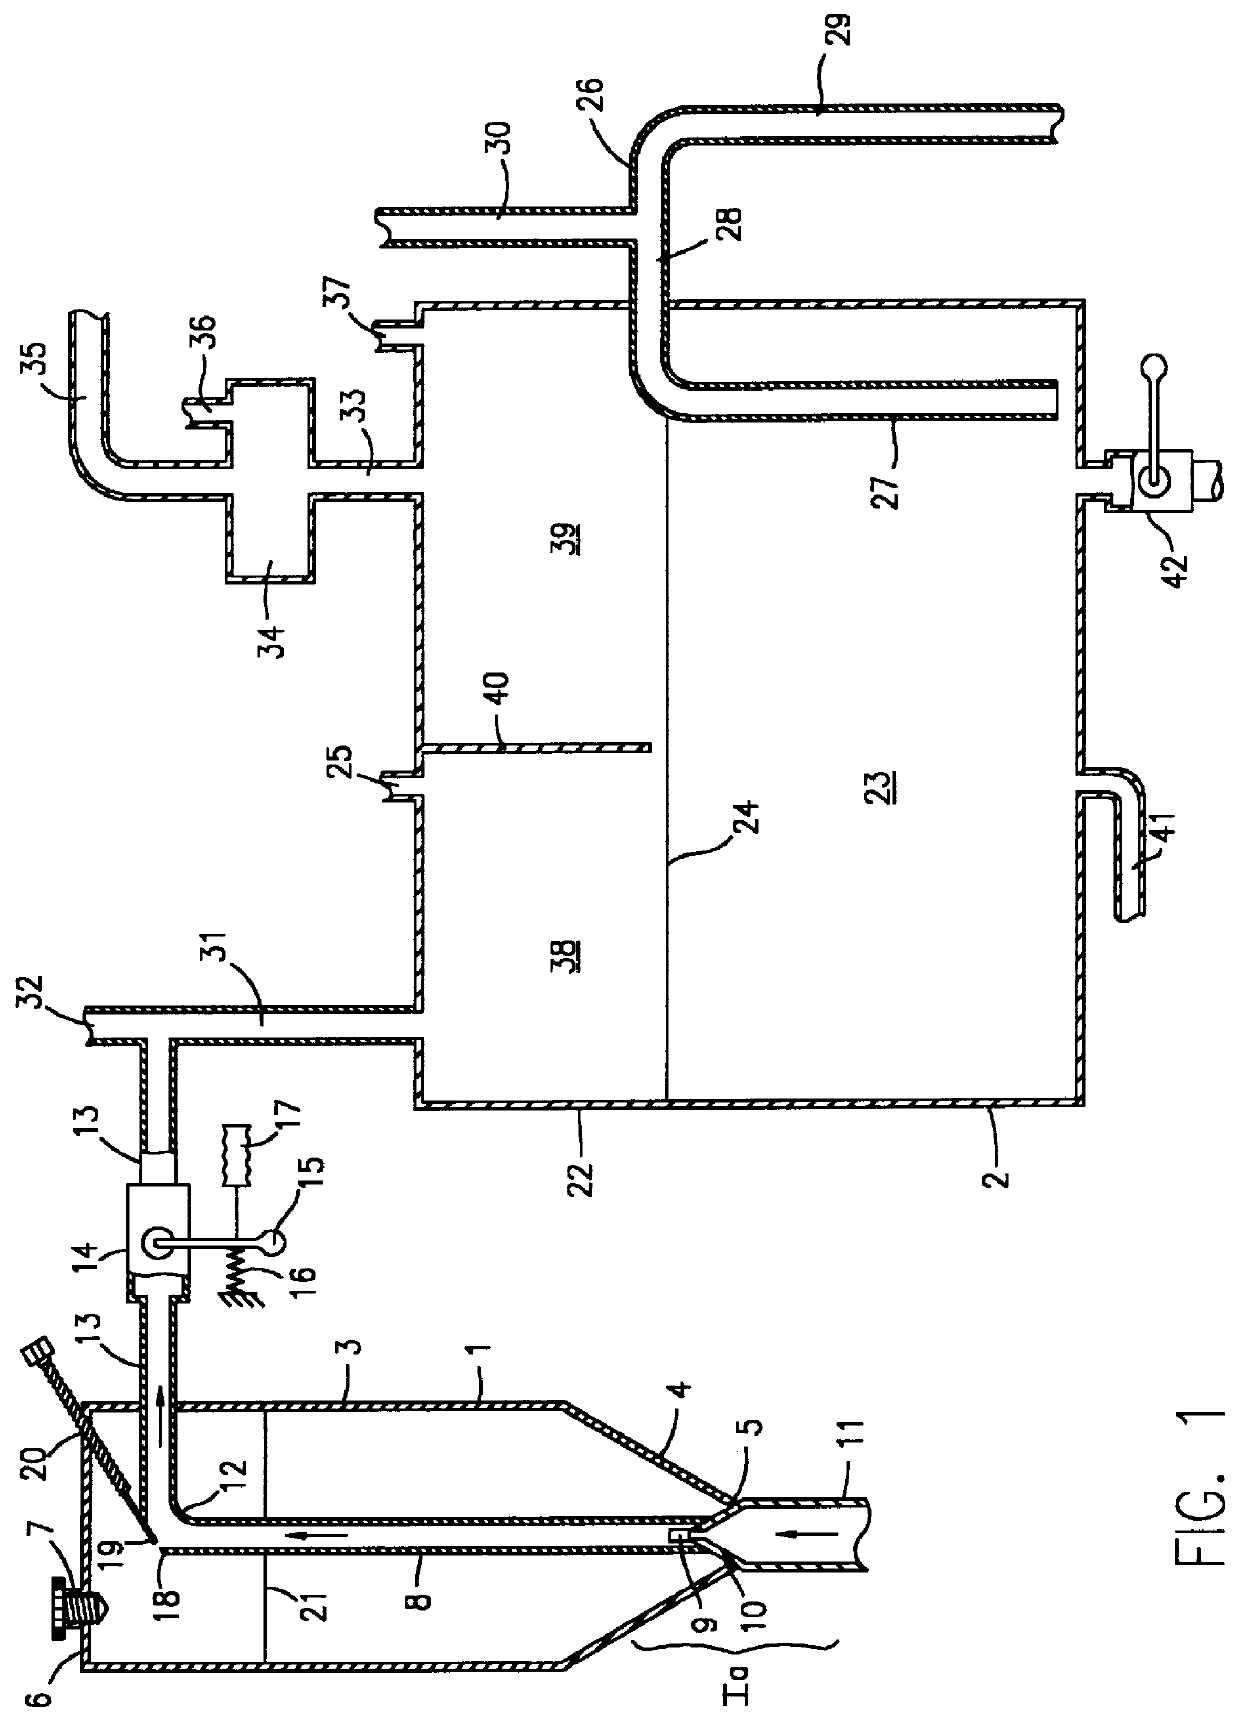 Process and apparatus for producing phosphine-containing gas